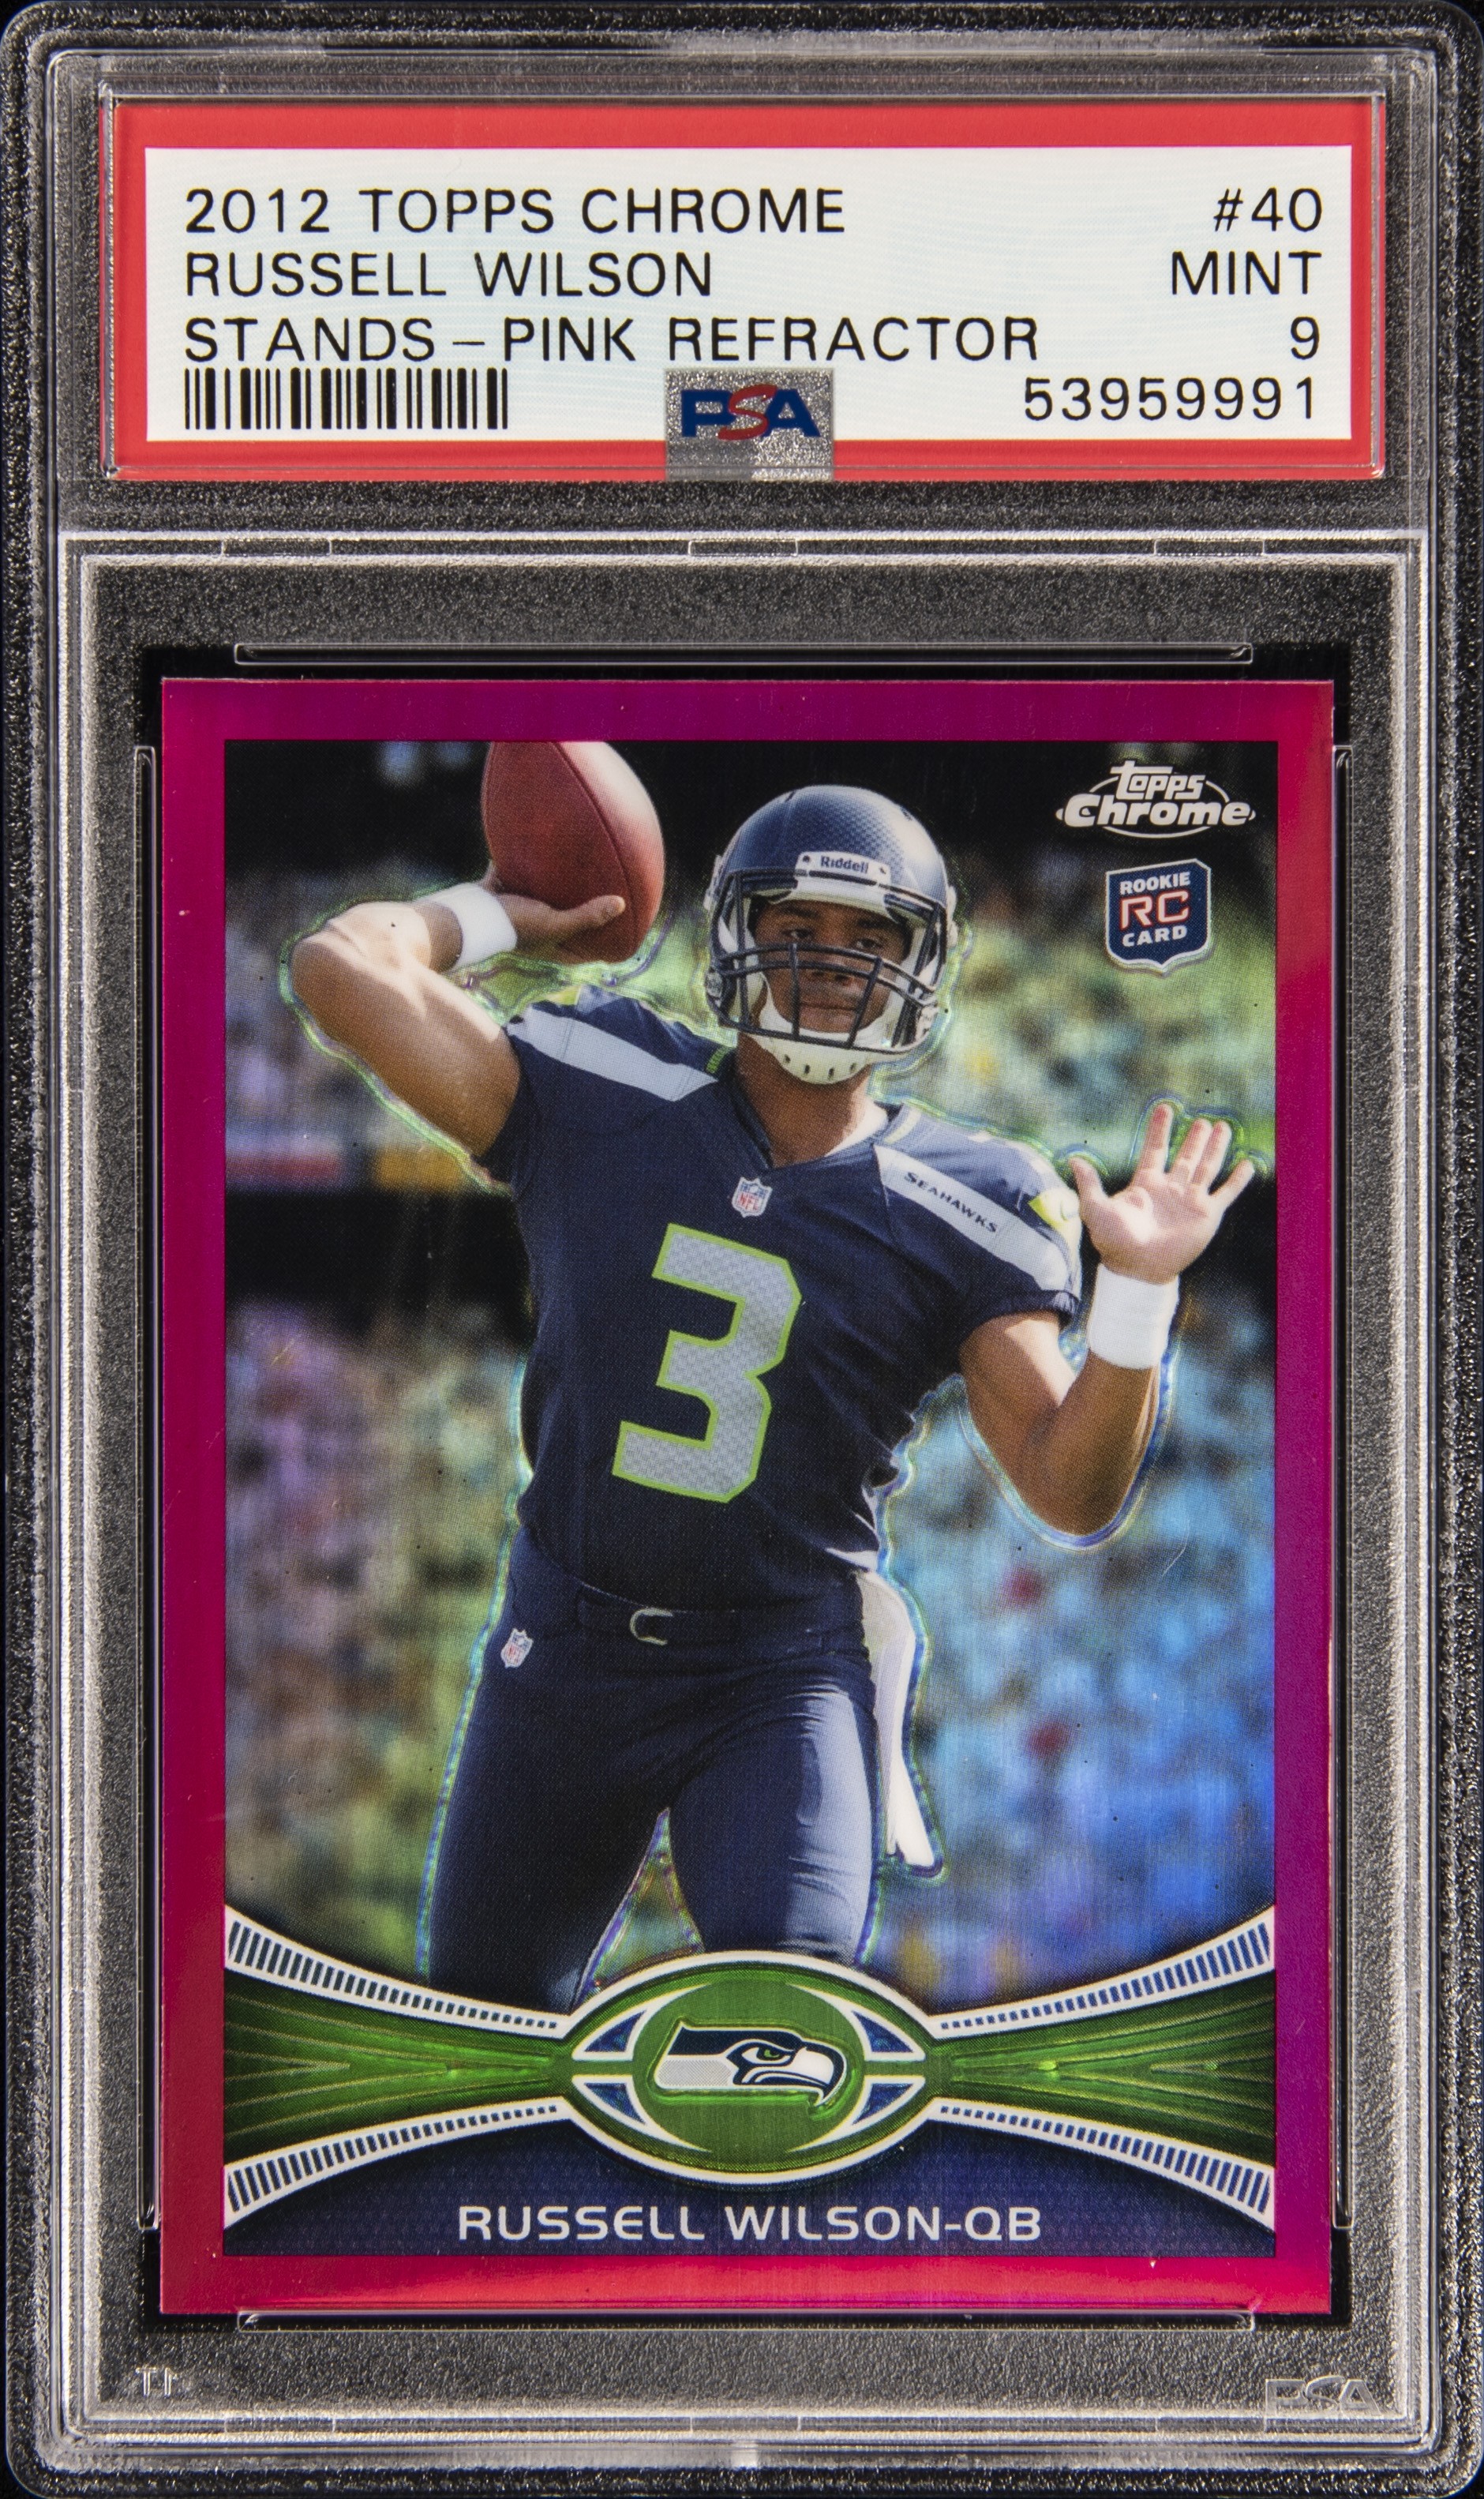 2012 Topps Chrome Pink Refractor #40 Russell Wilson, Stands Visible Rookie Card (#280/399) – PSA MINT 9